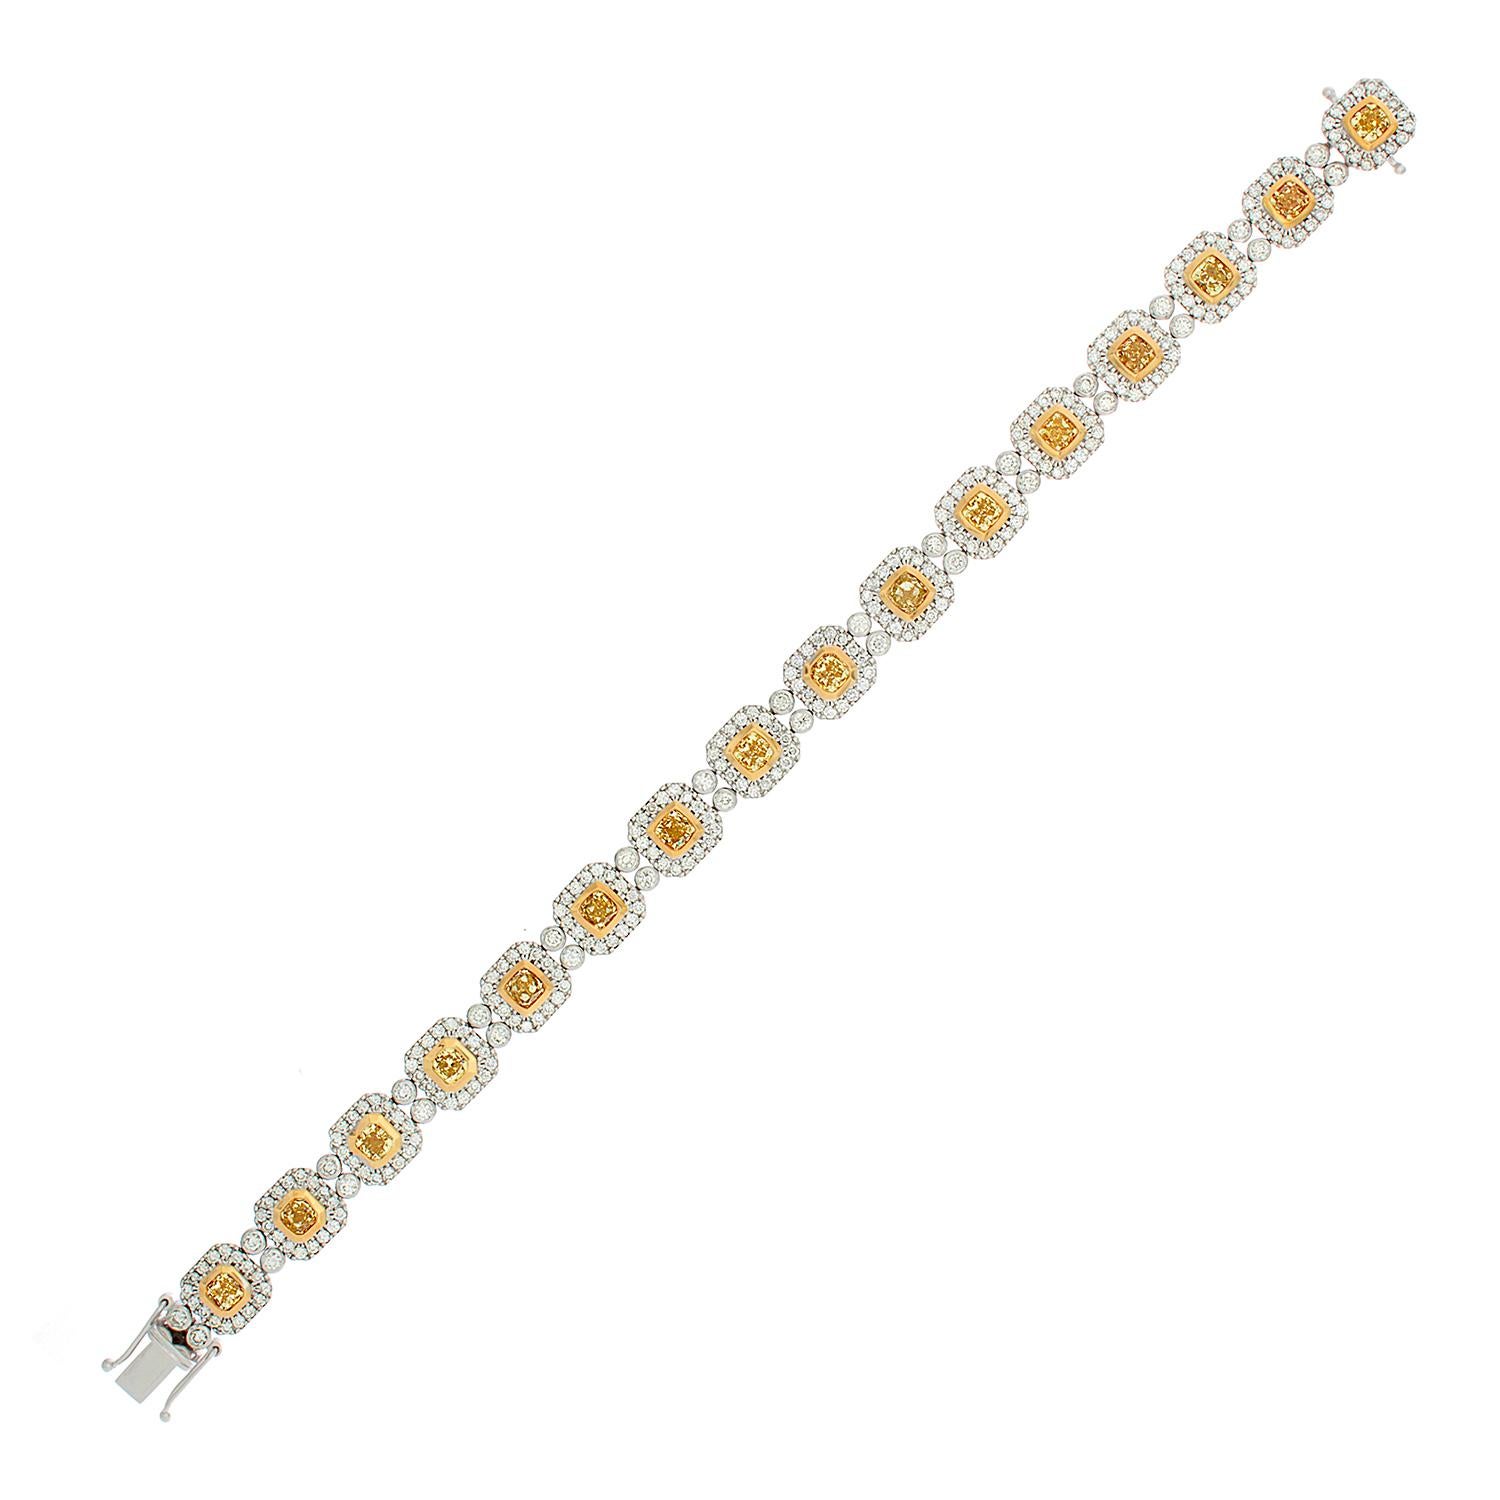 A captivating bracelet featuring 5.23 carats of fancy yellow diamonds bezel set in 18K yellow gold. Each cushion cut fancy yellow diamond is haloed and linked by 4.62 carats of round cut sparkling white diamonds set in 18K white gold.  This is a